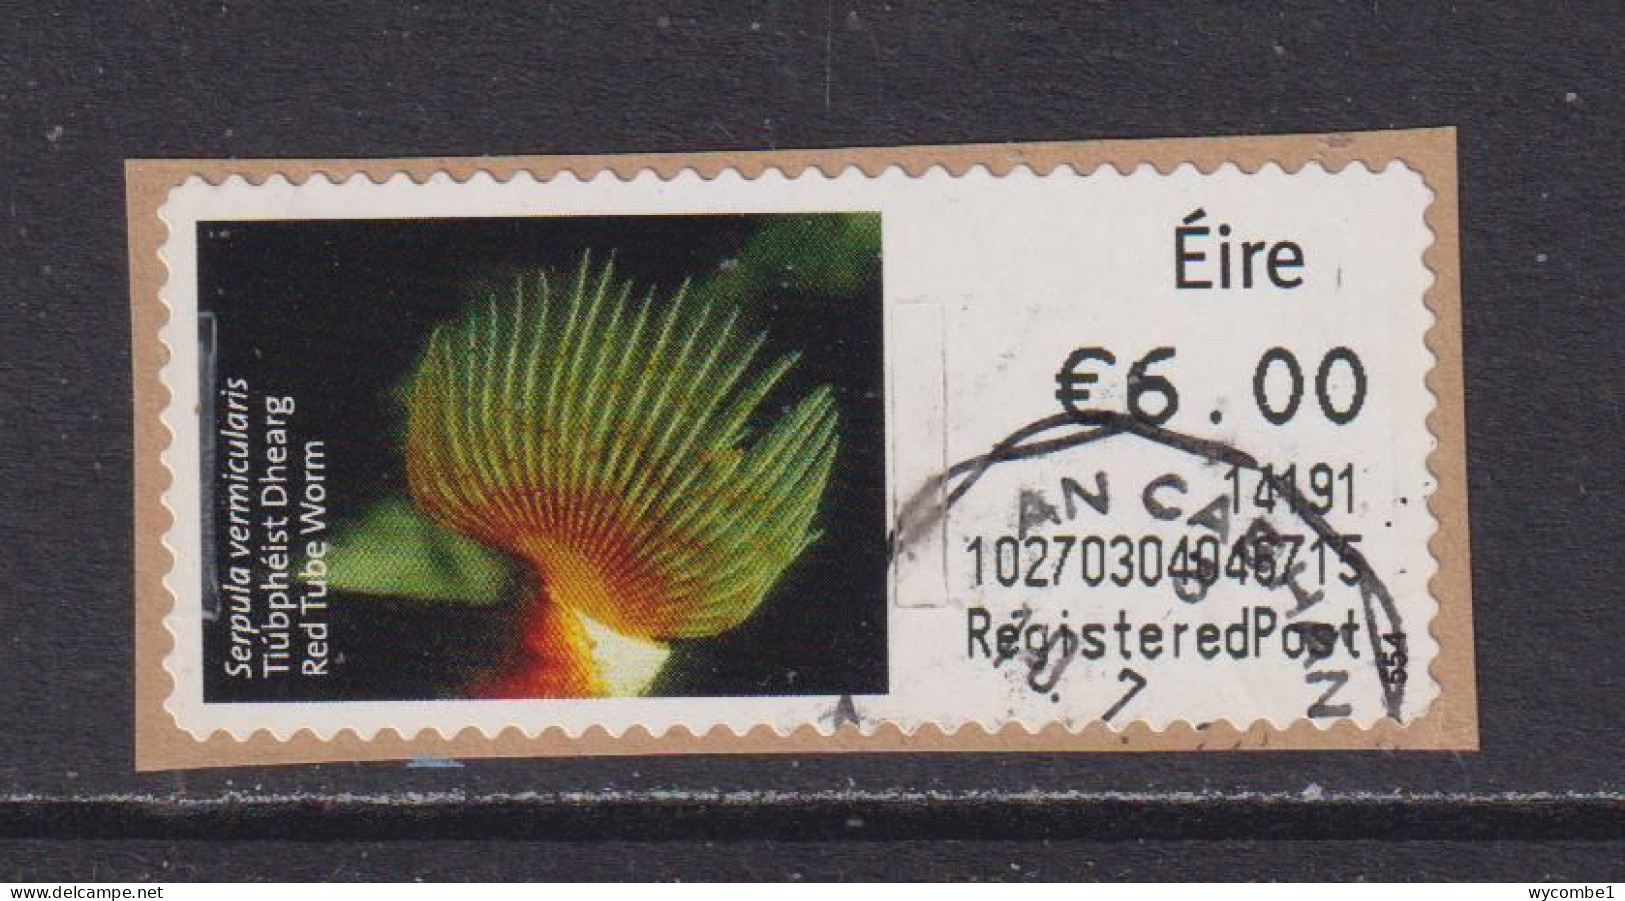 IRELAND  -  2013 Red Tube Worm SOAR (Stamp On A Roll)  CDS  Used On Piece As Scan - Used Stamps